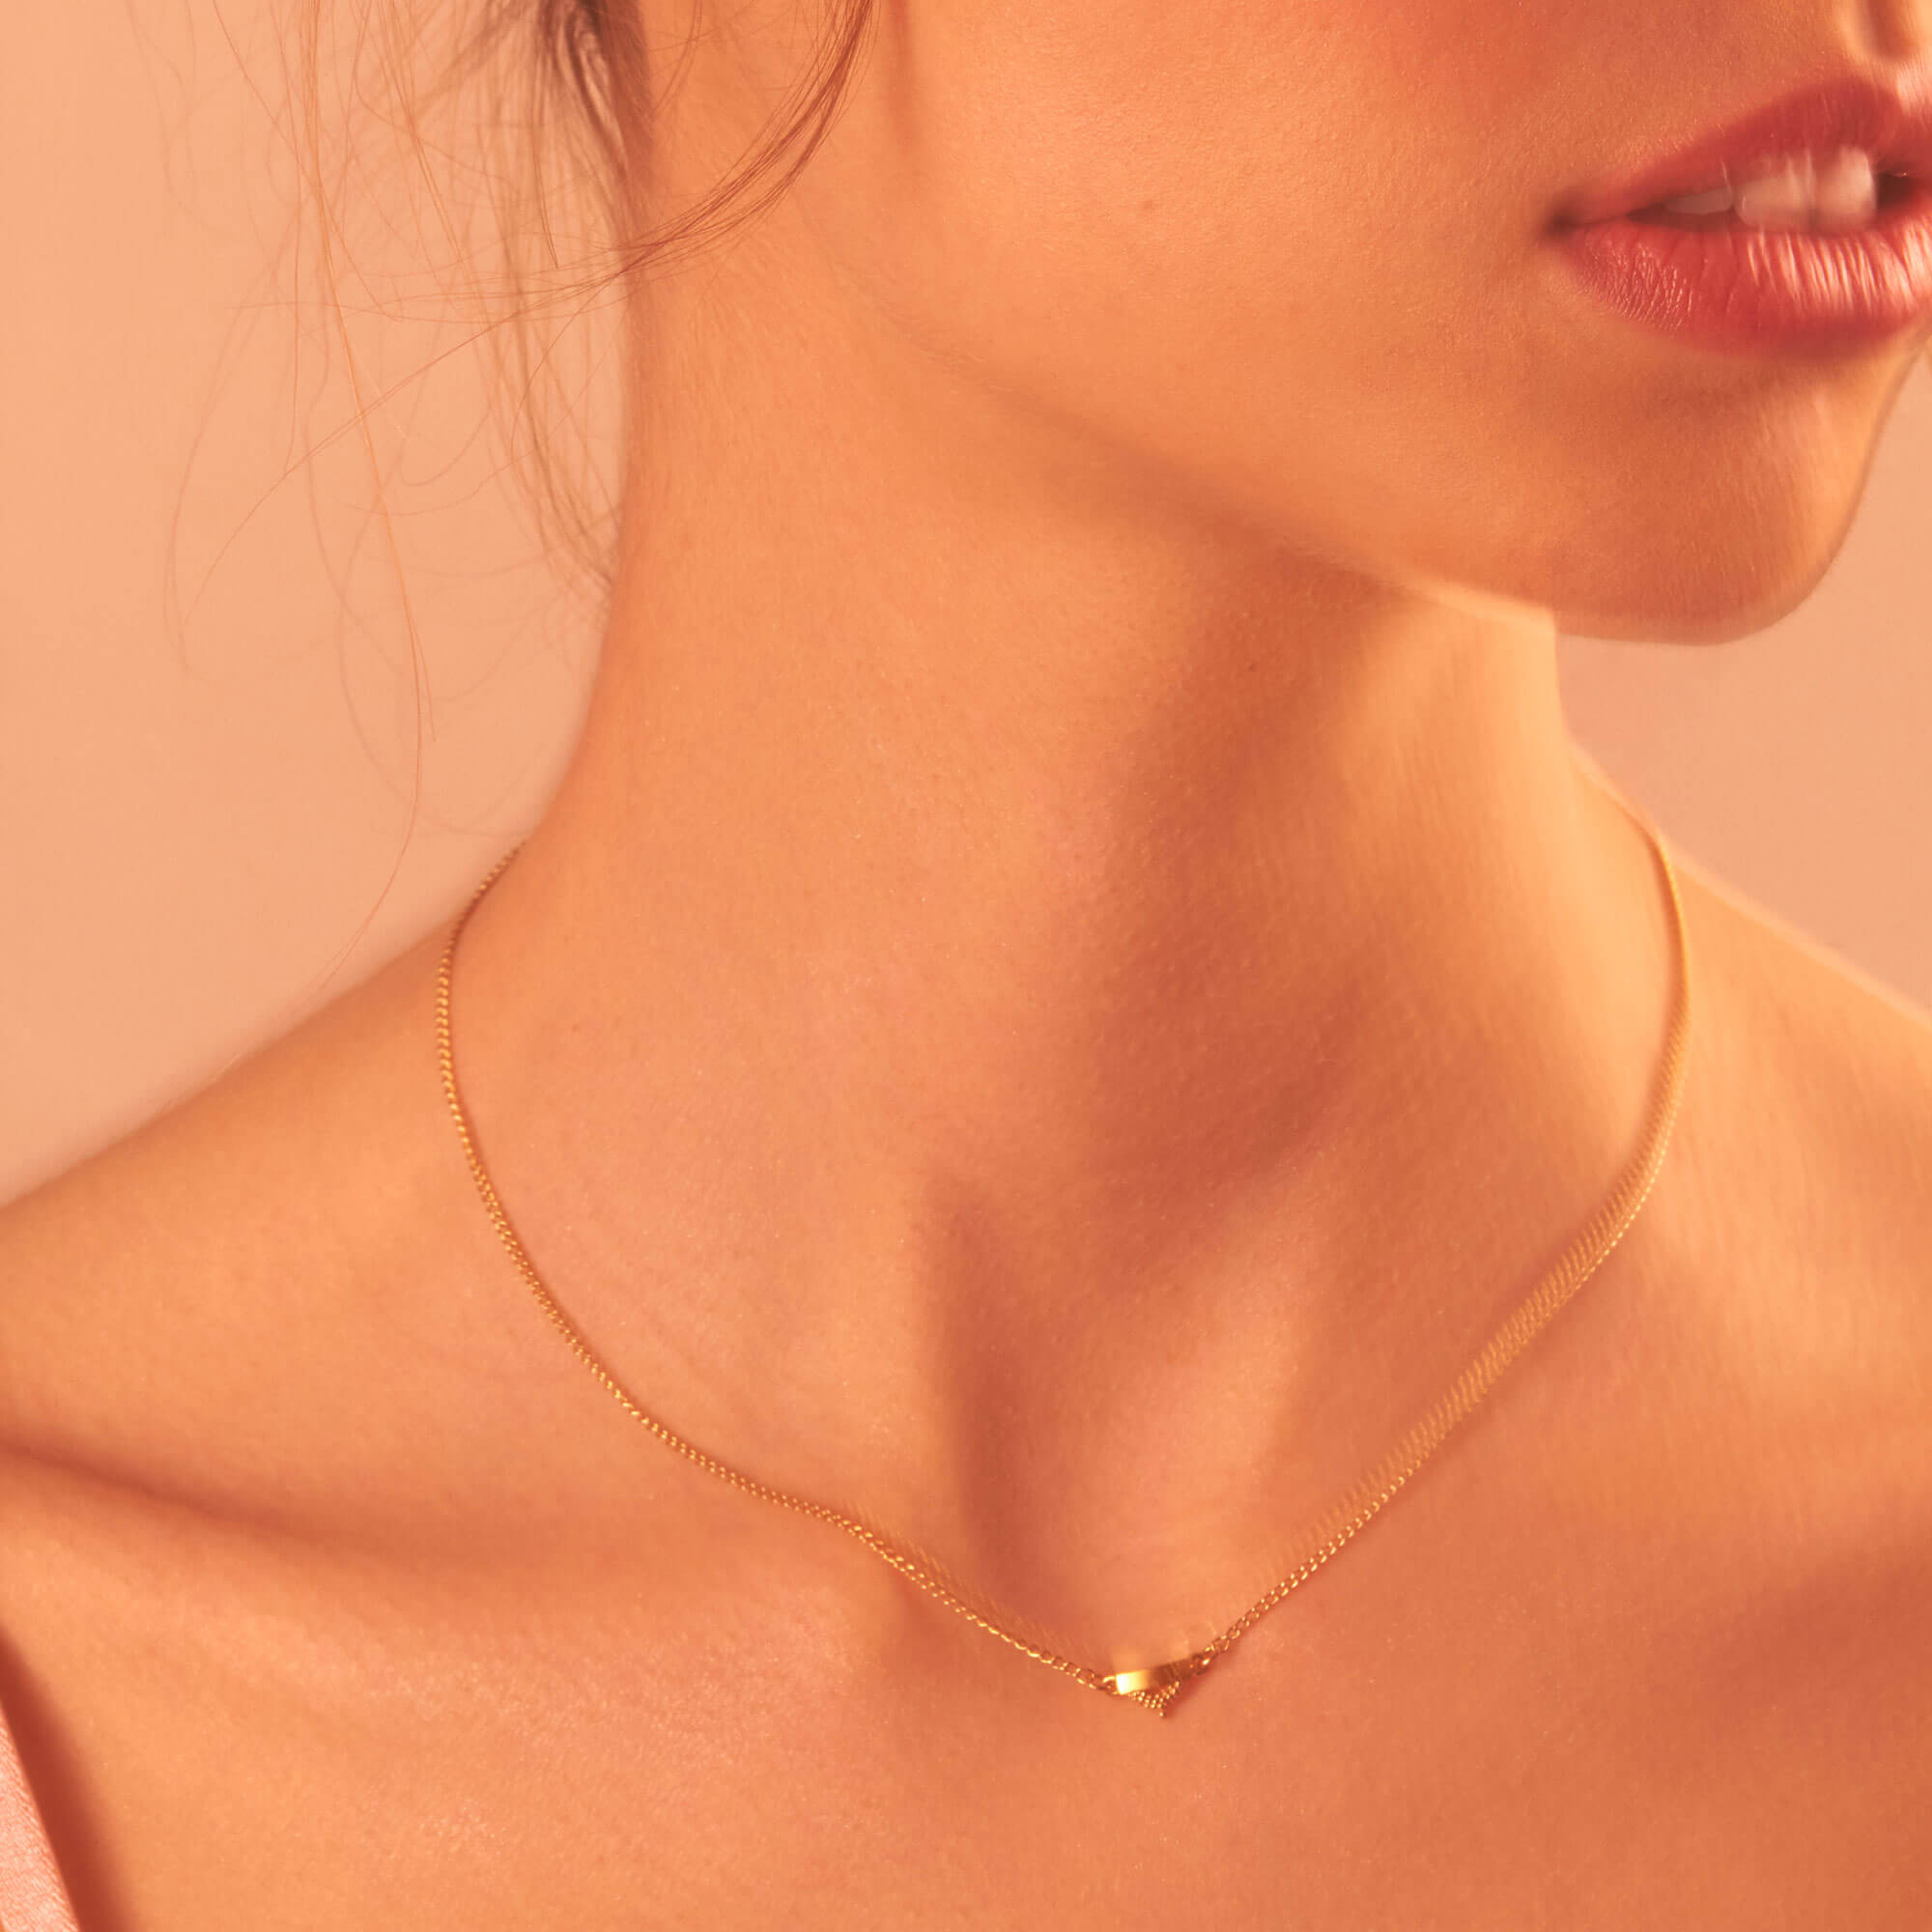 Pectus Yellow Gold Pendant Necklace worn by model